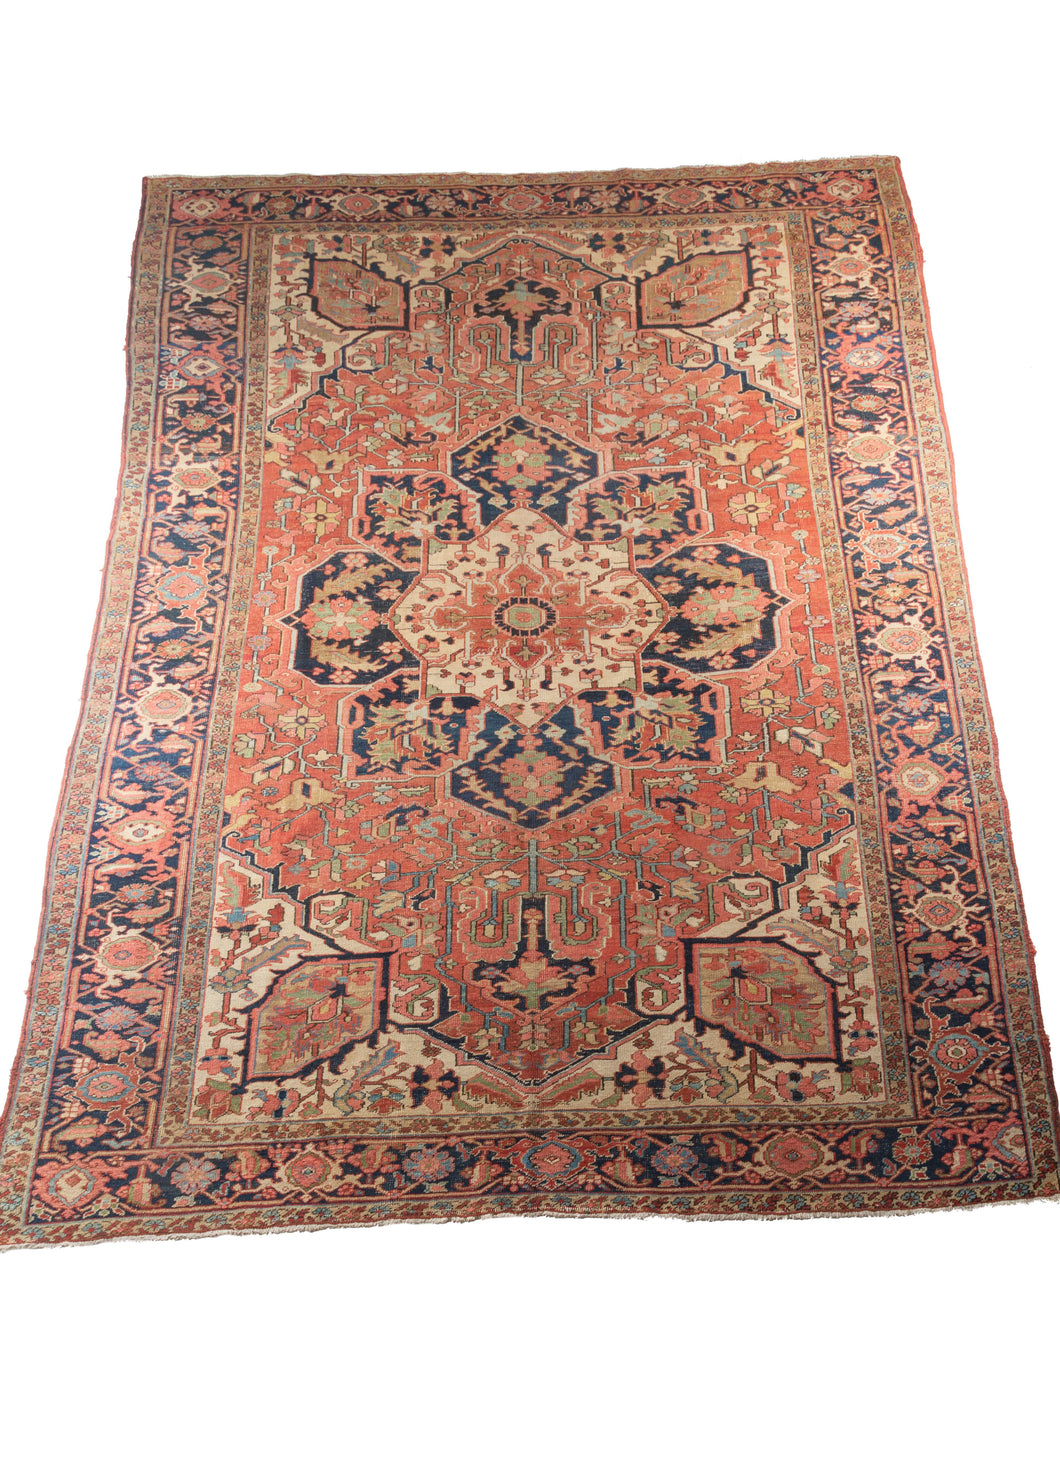 Antique NW Persian Baby Serapi Heriz Room size Rug with a central medallion and fine patina in the softened natural dyes and grounding through the deep indigo blue